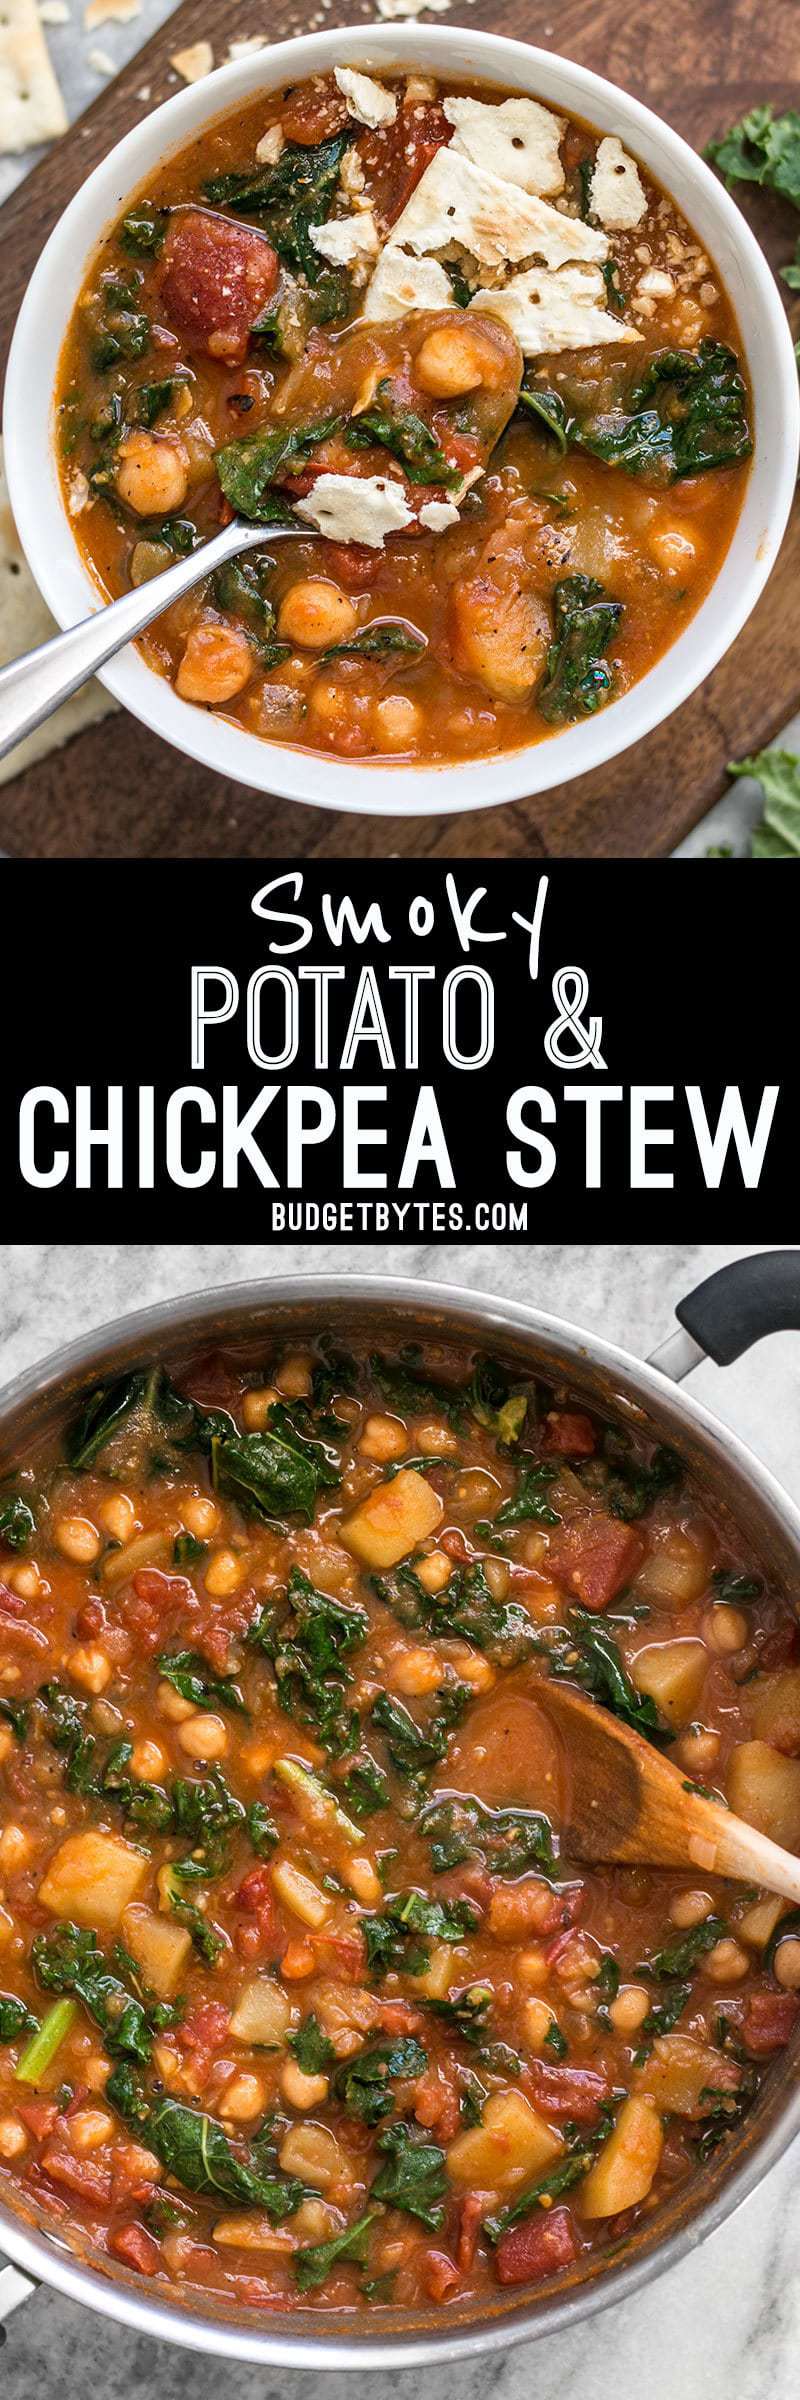 This Smoky Potato and Chickpea Stew is a hearty and filling plant-based dish that will keep you full and warm this winter! BudgetBytes.com